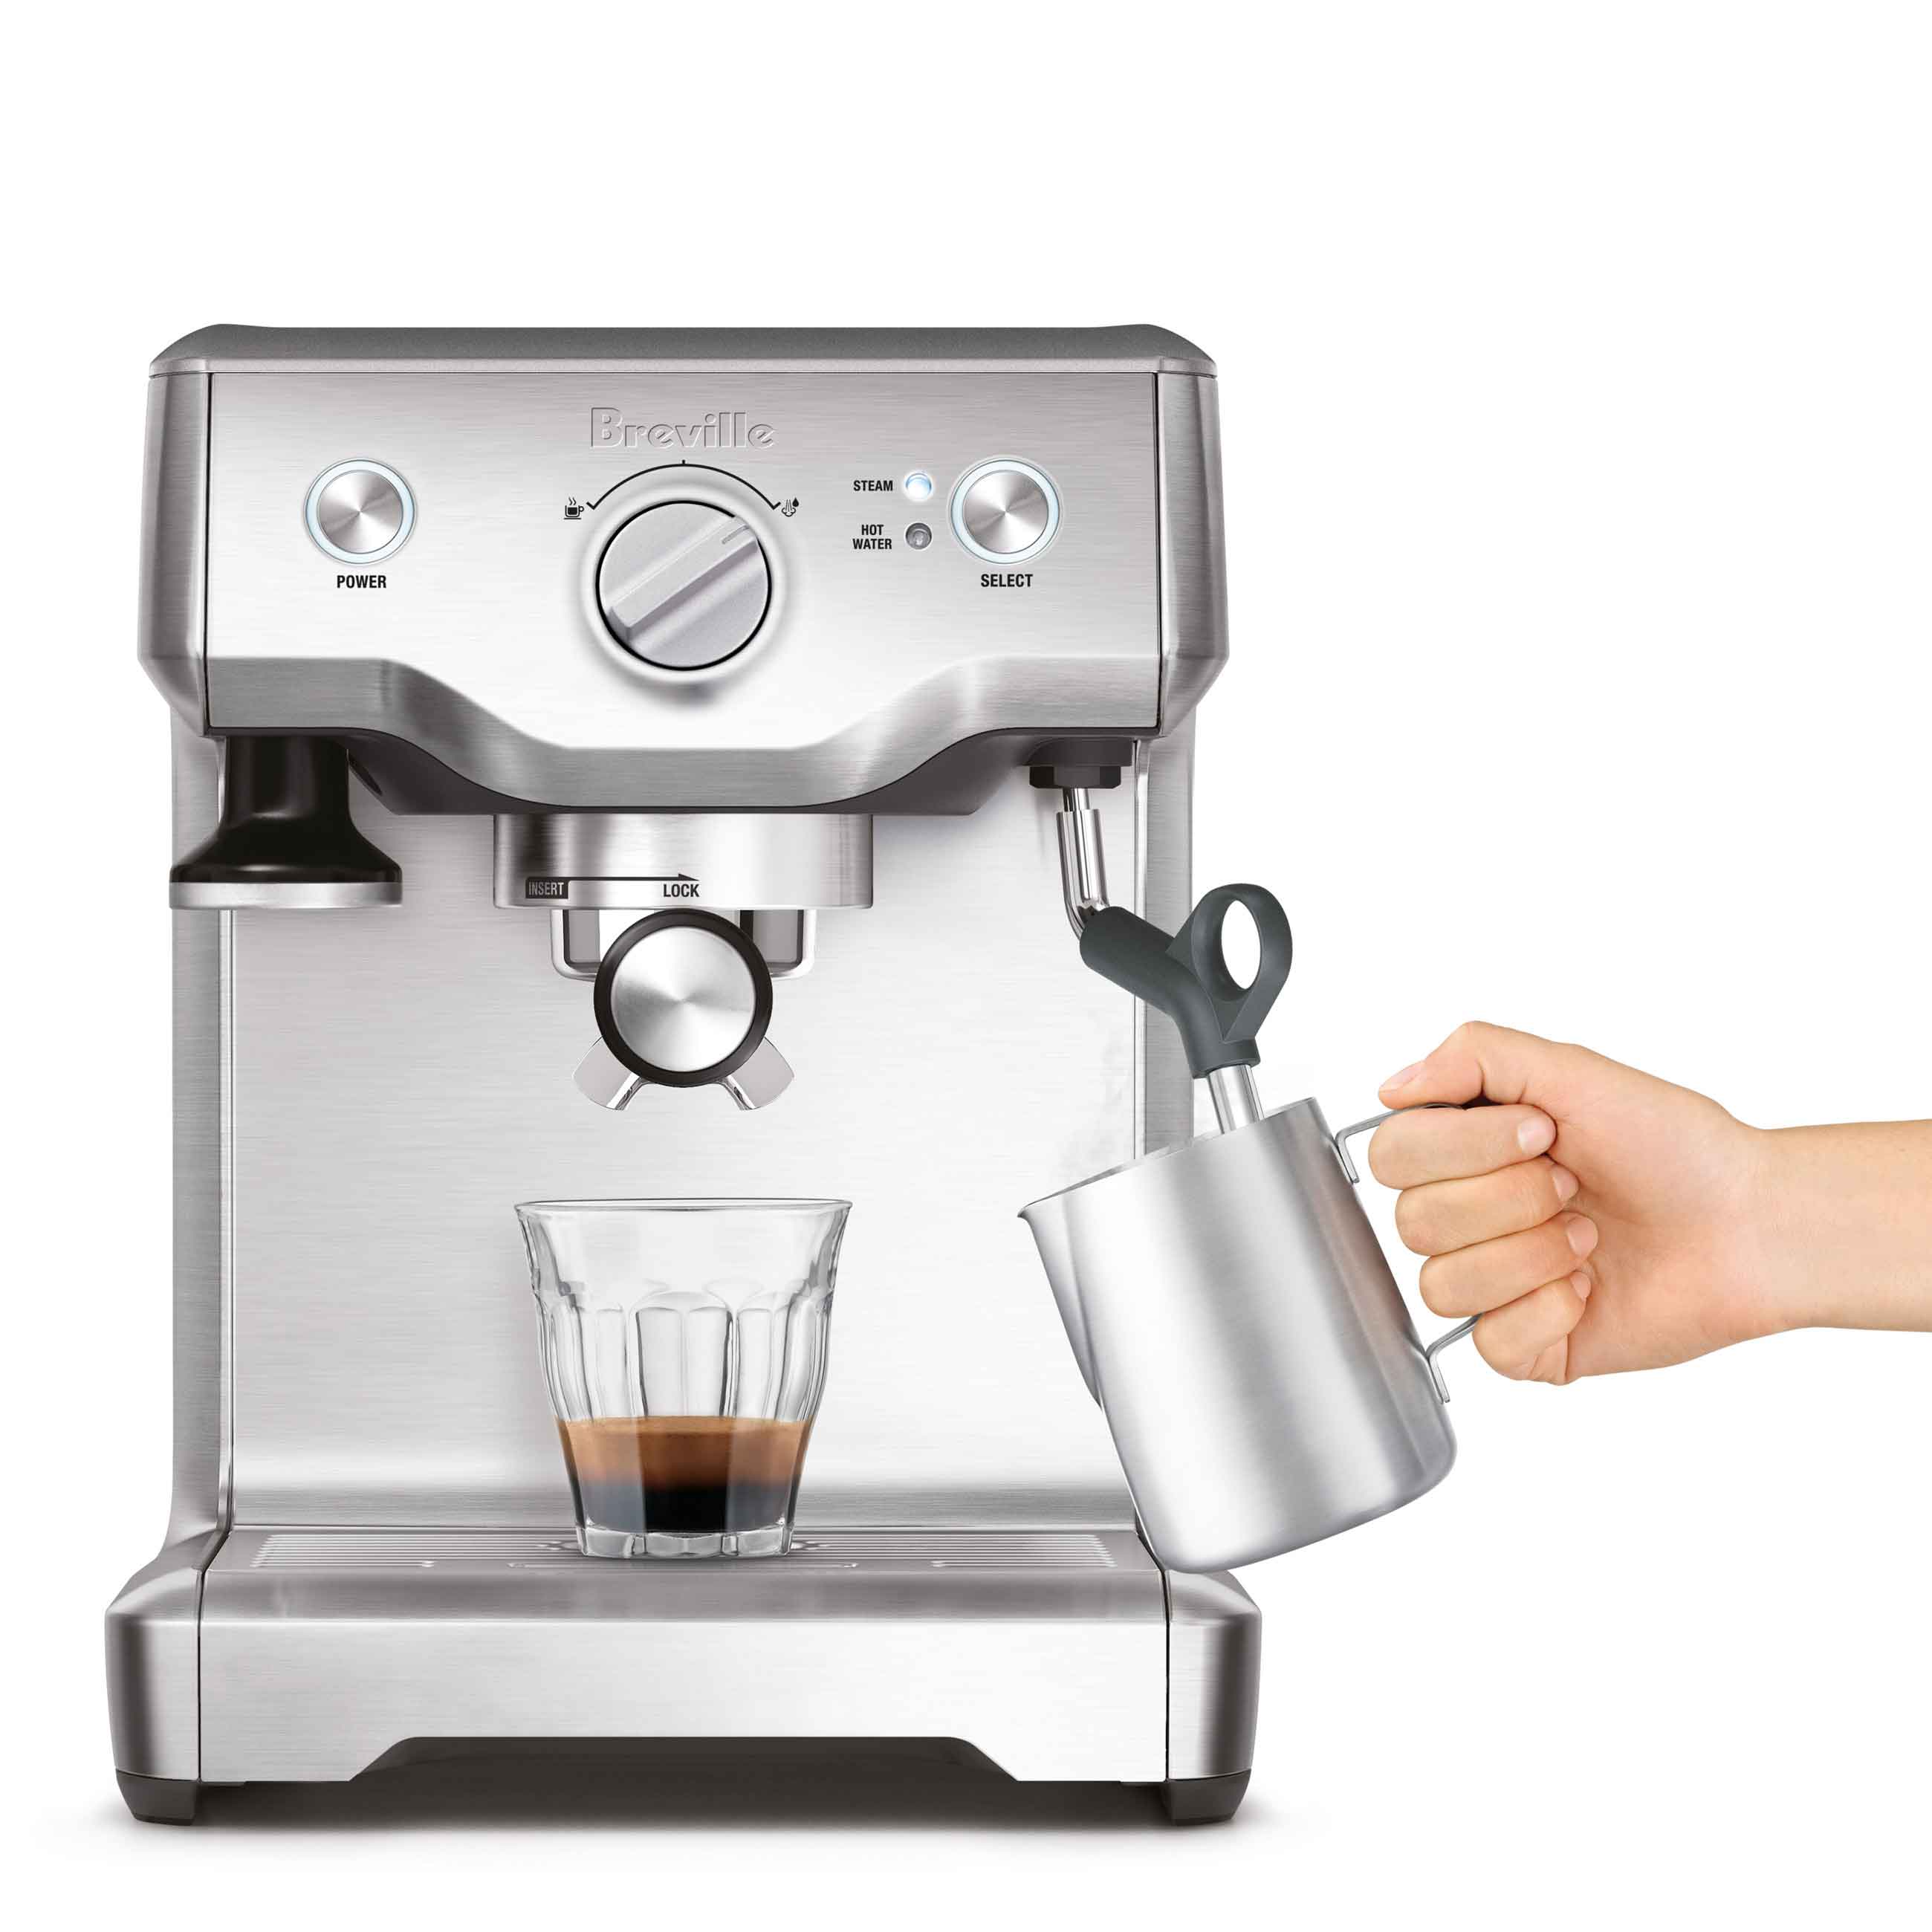  the Duo-Temp™ Pro Espresso in Brushed Stainless Steel milk frothing